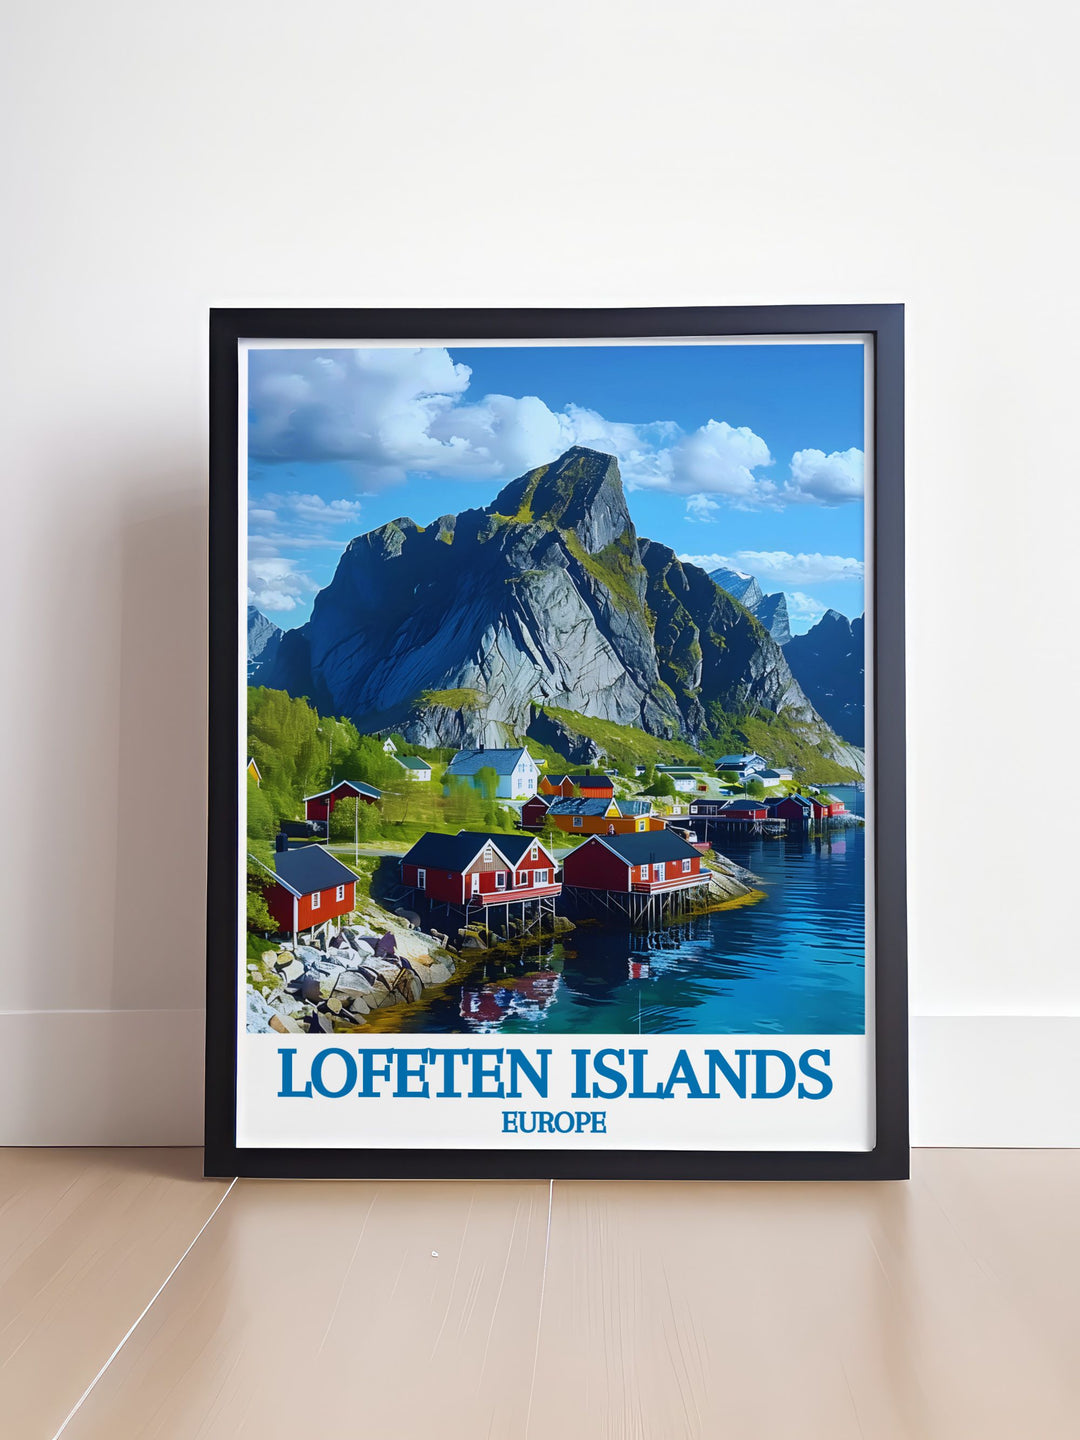 Fine art print capturing the enchanting beauty of Hamnøy in the Lofoten Islands, Norway. The poster showcases the red wooden cabins against the dramatic mountain backdrop, reflecting in the crystal clear waters. The vibrant colors and intricate details bring the serene and picturesque village to life, making it a standout piece for home decor.